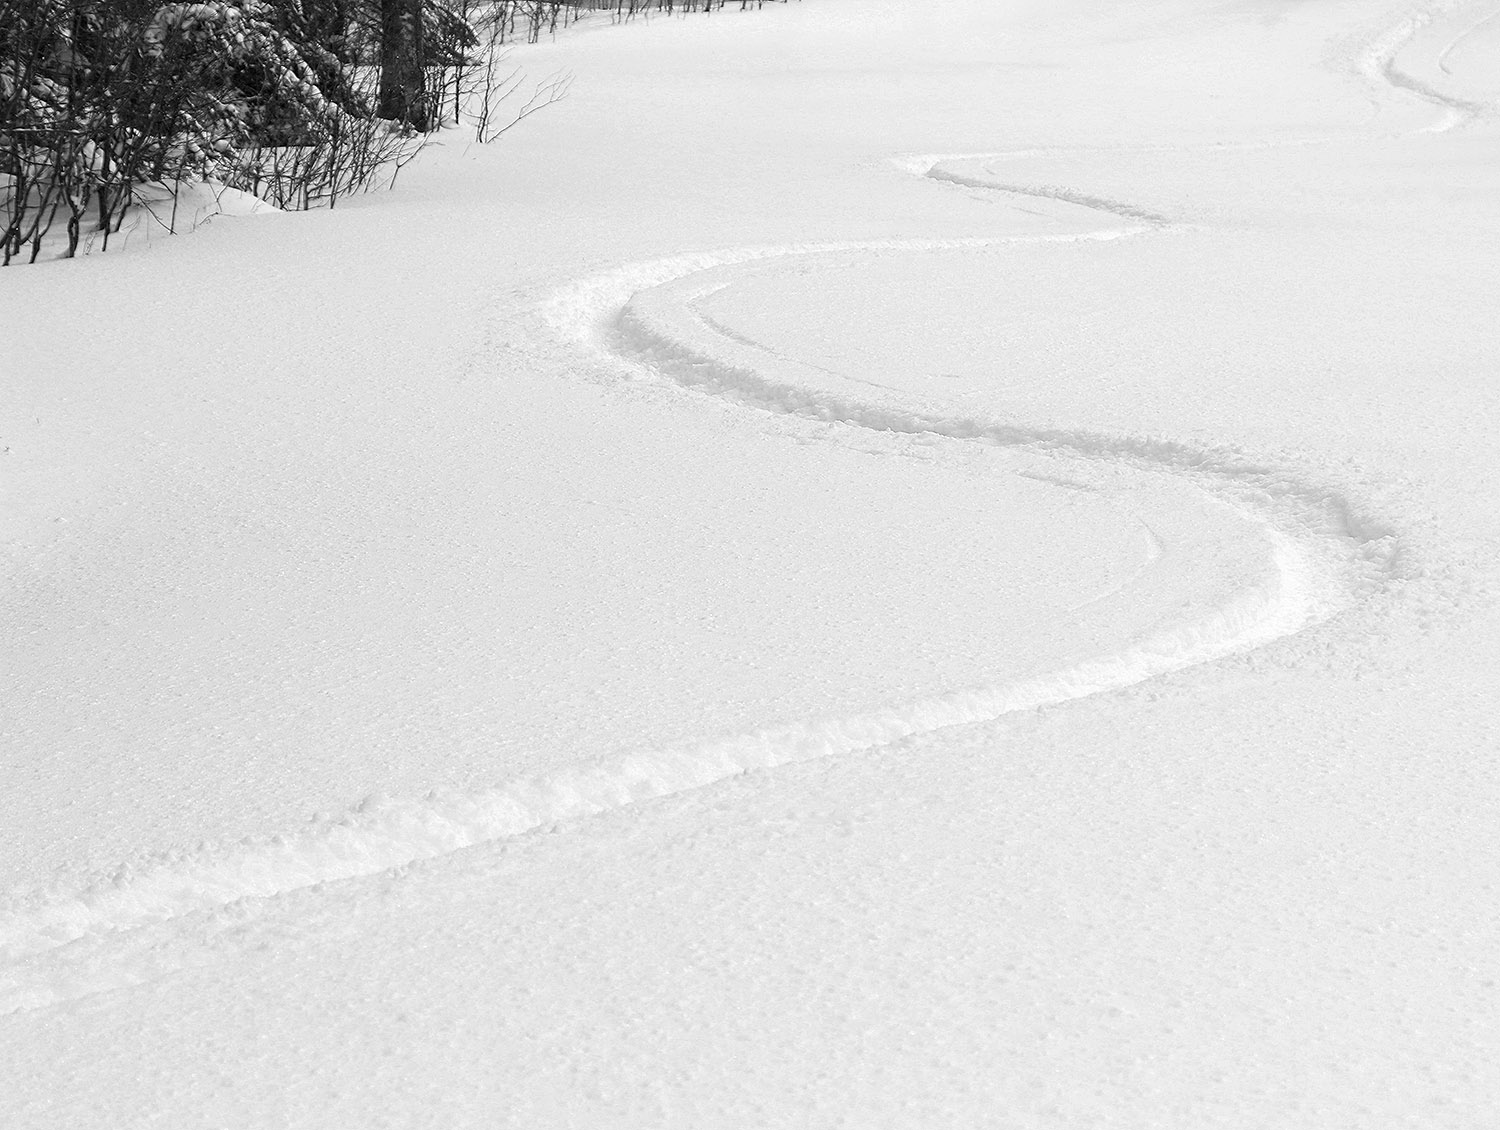 An image of ski tracks in powder after an April snowstorm in the Wilderness terrain area at Bolton Valley Ski Resort in Vermont